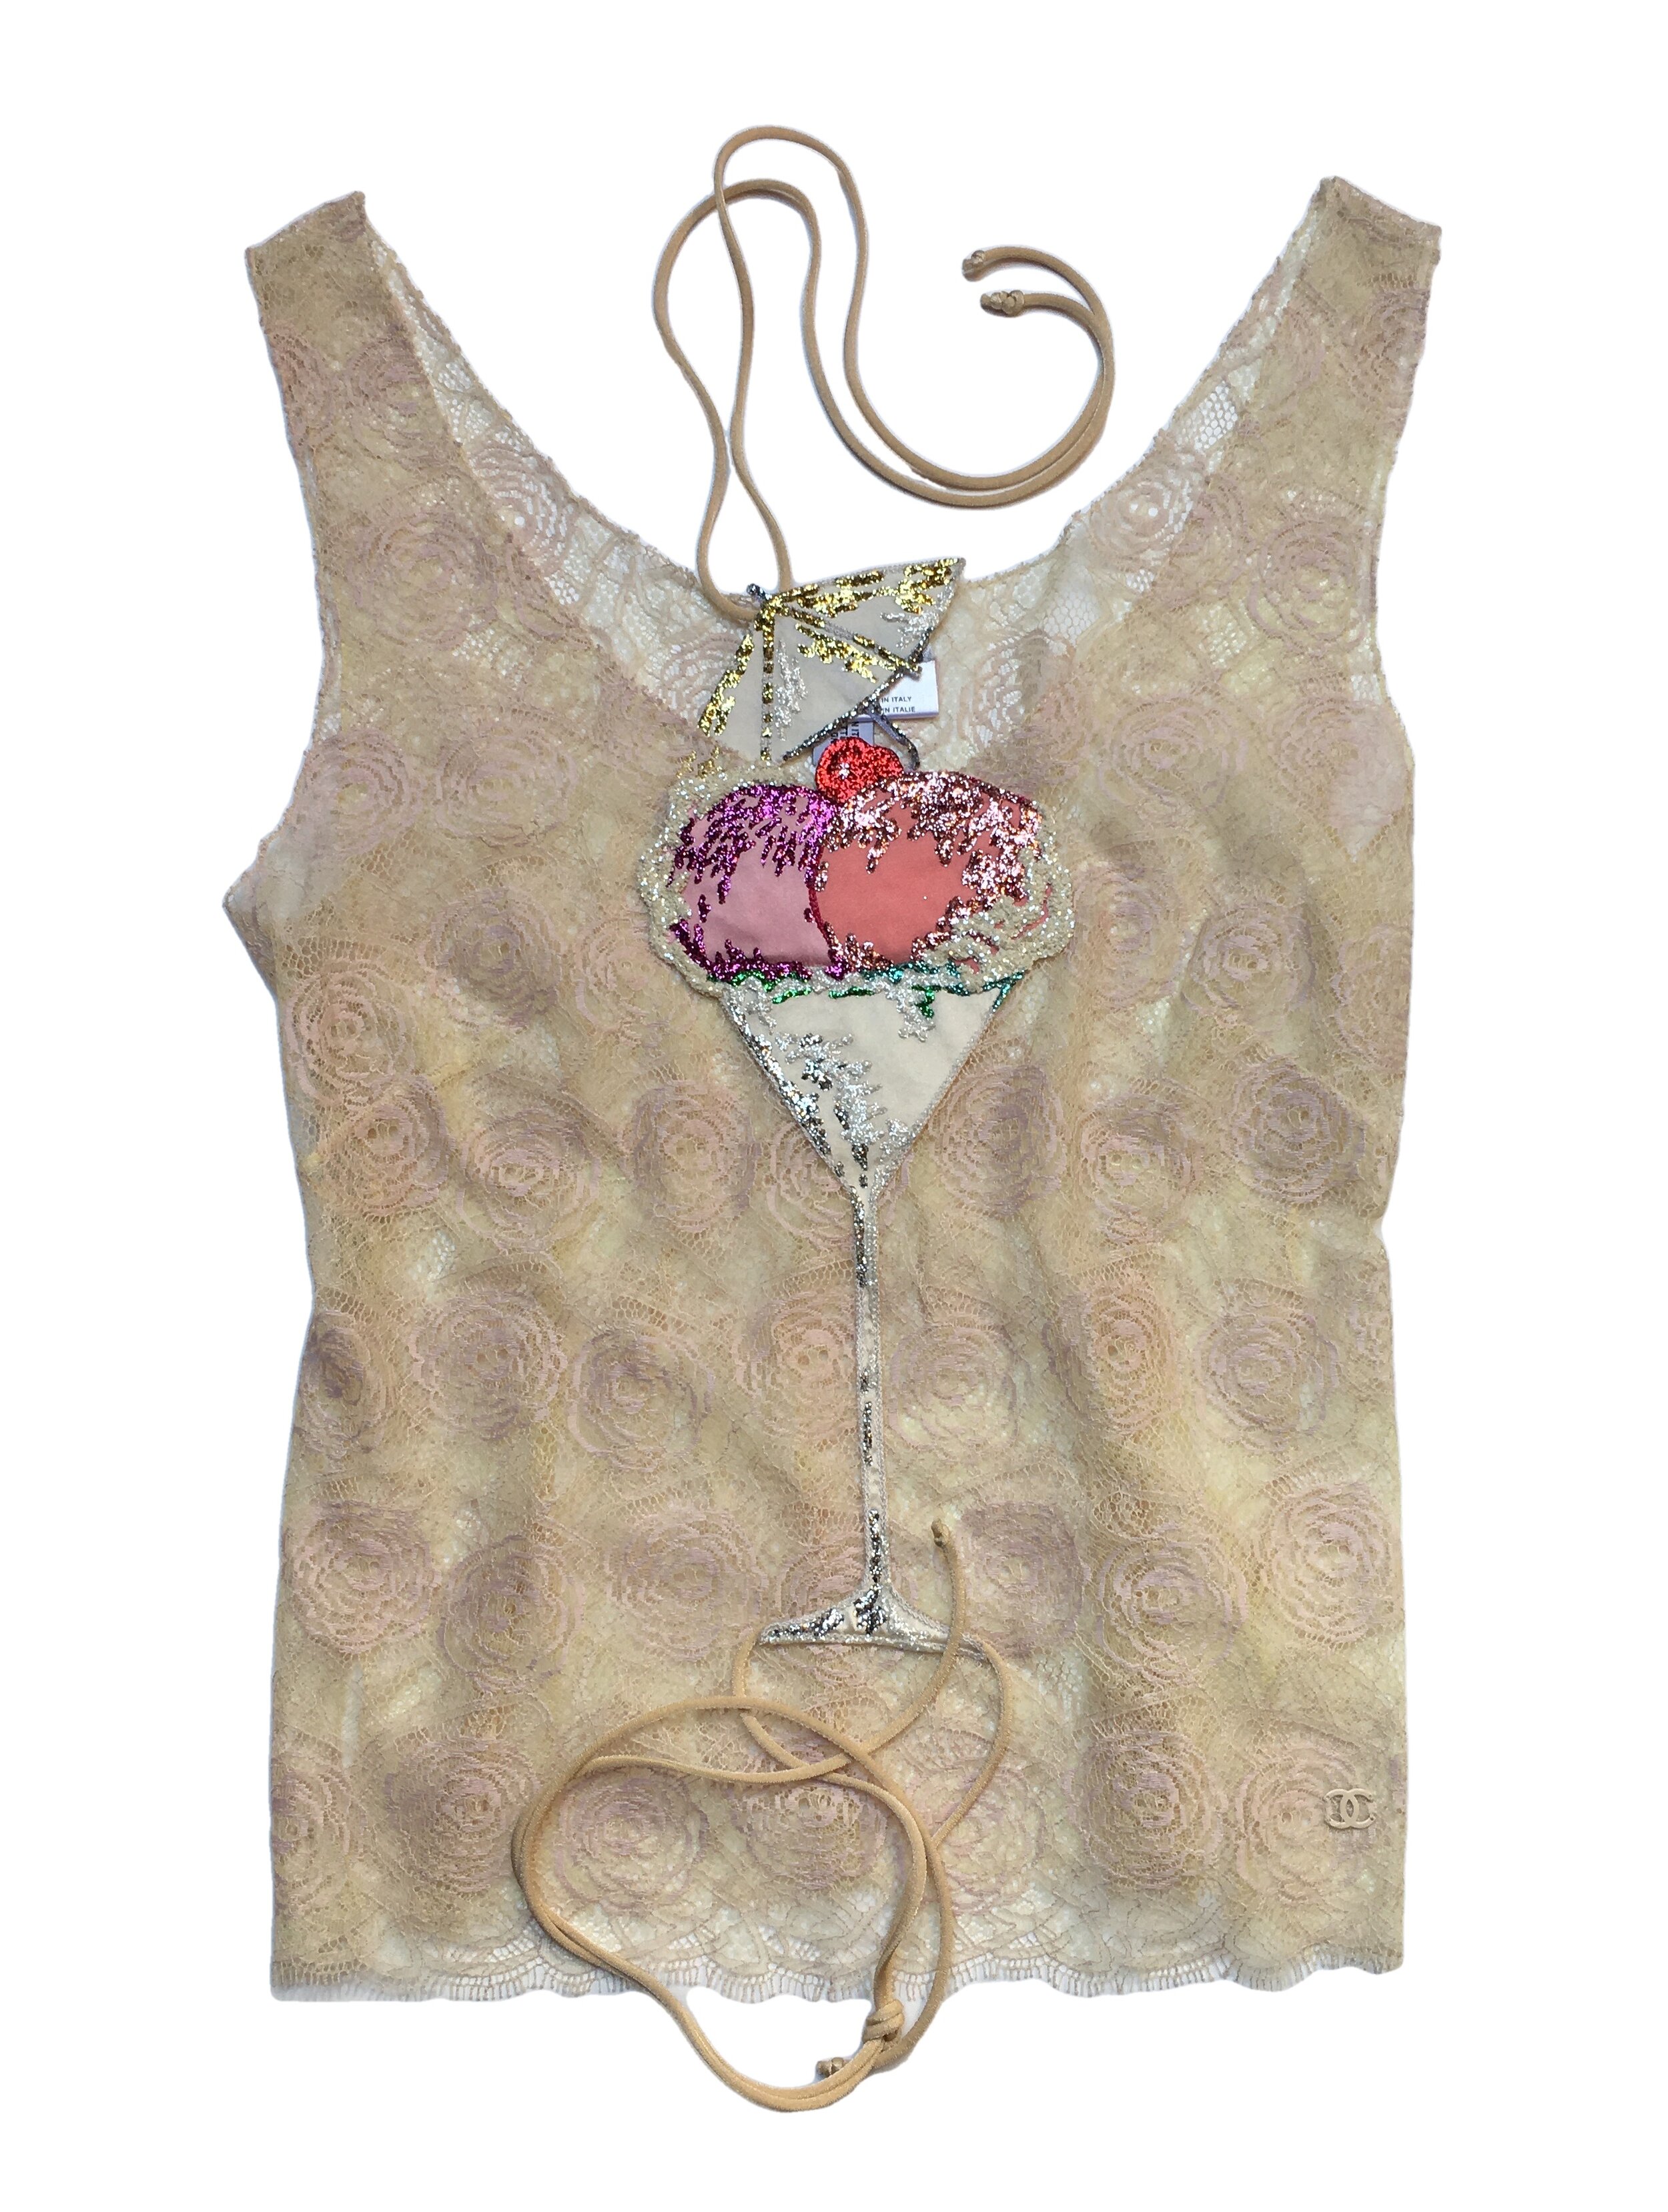 Chanel lace vest embellished with ice-cream Sunday appliqué. — Mia